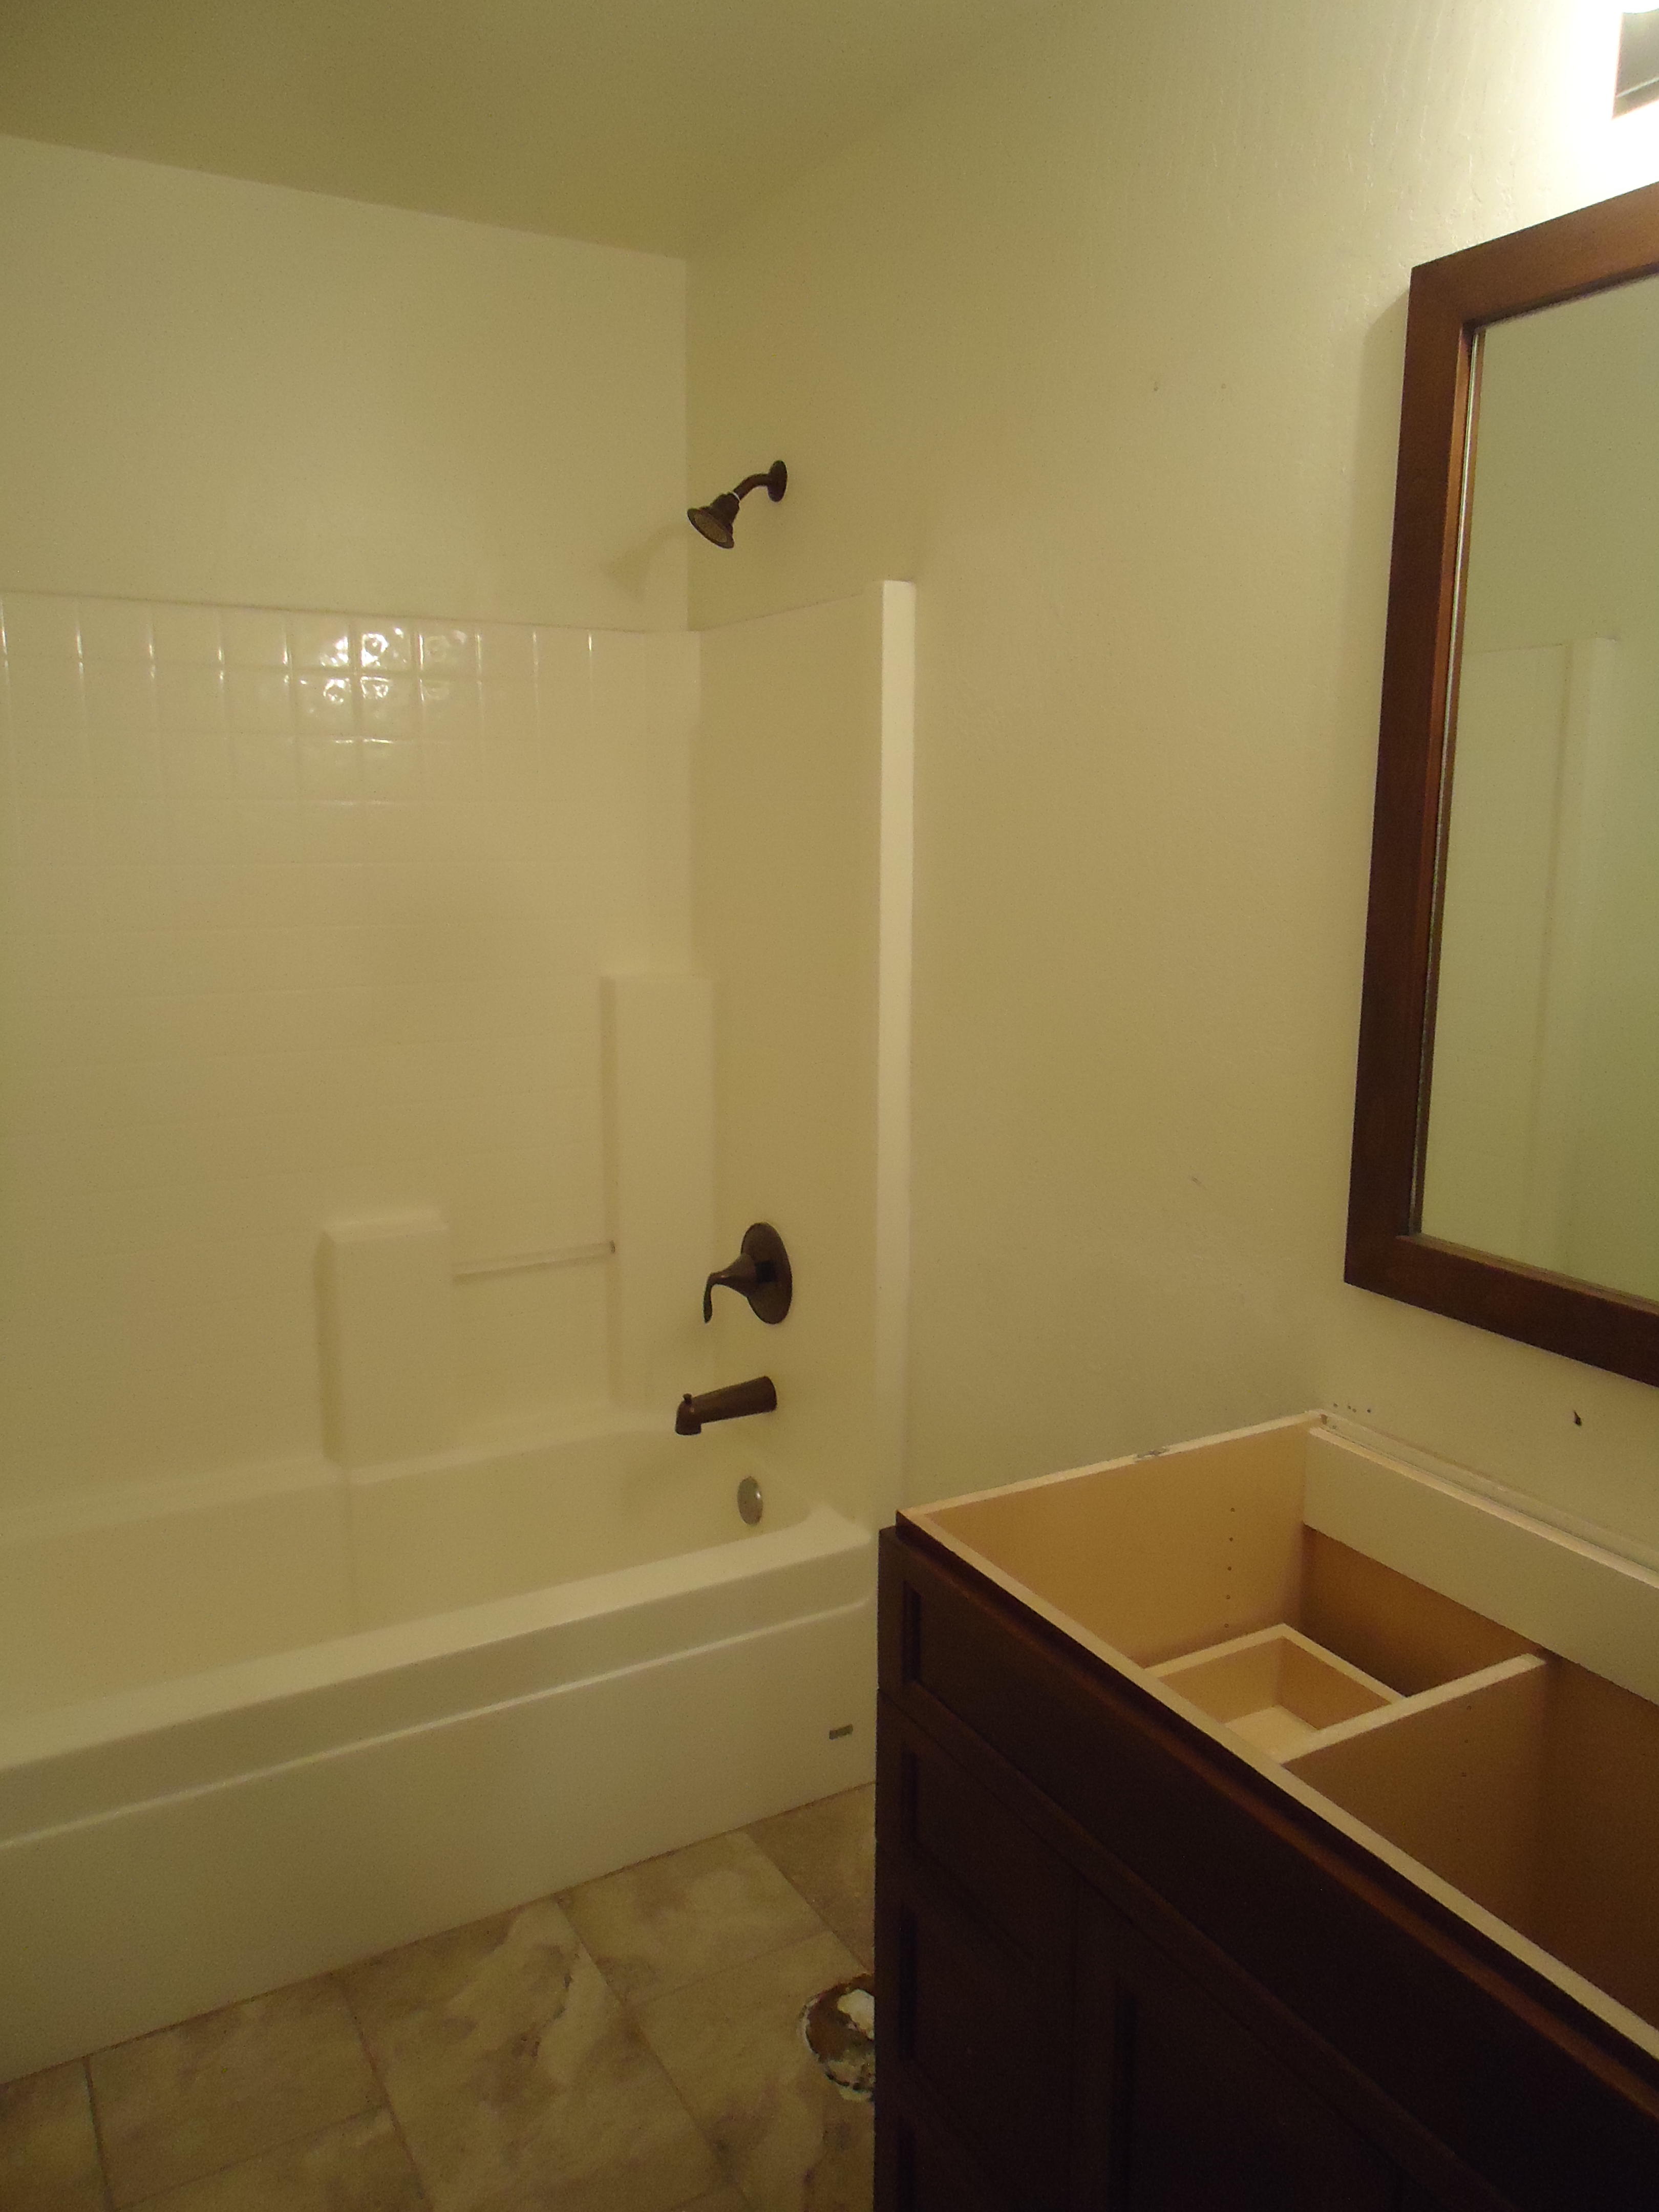 Professional bathroom remodeling services in Phoenix